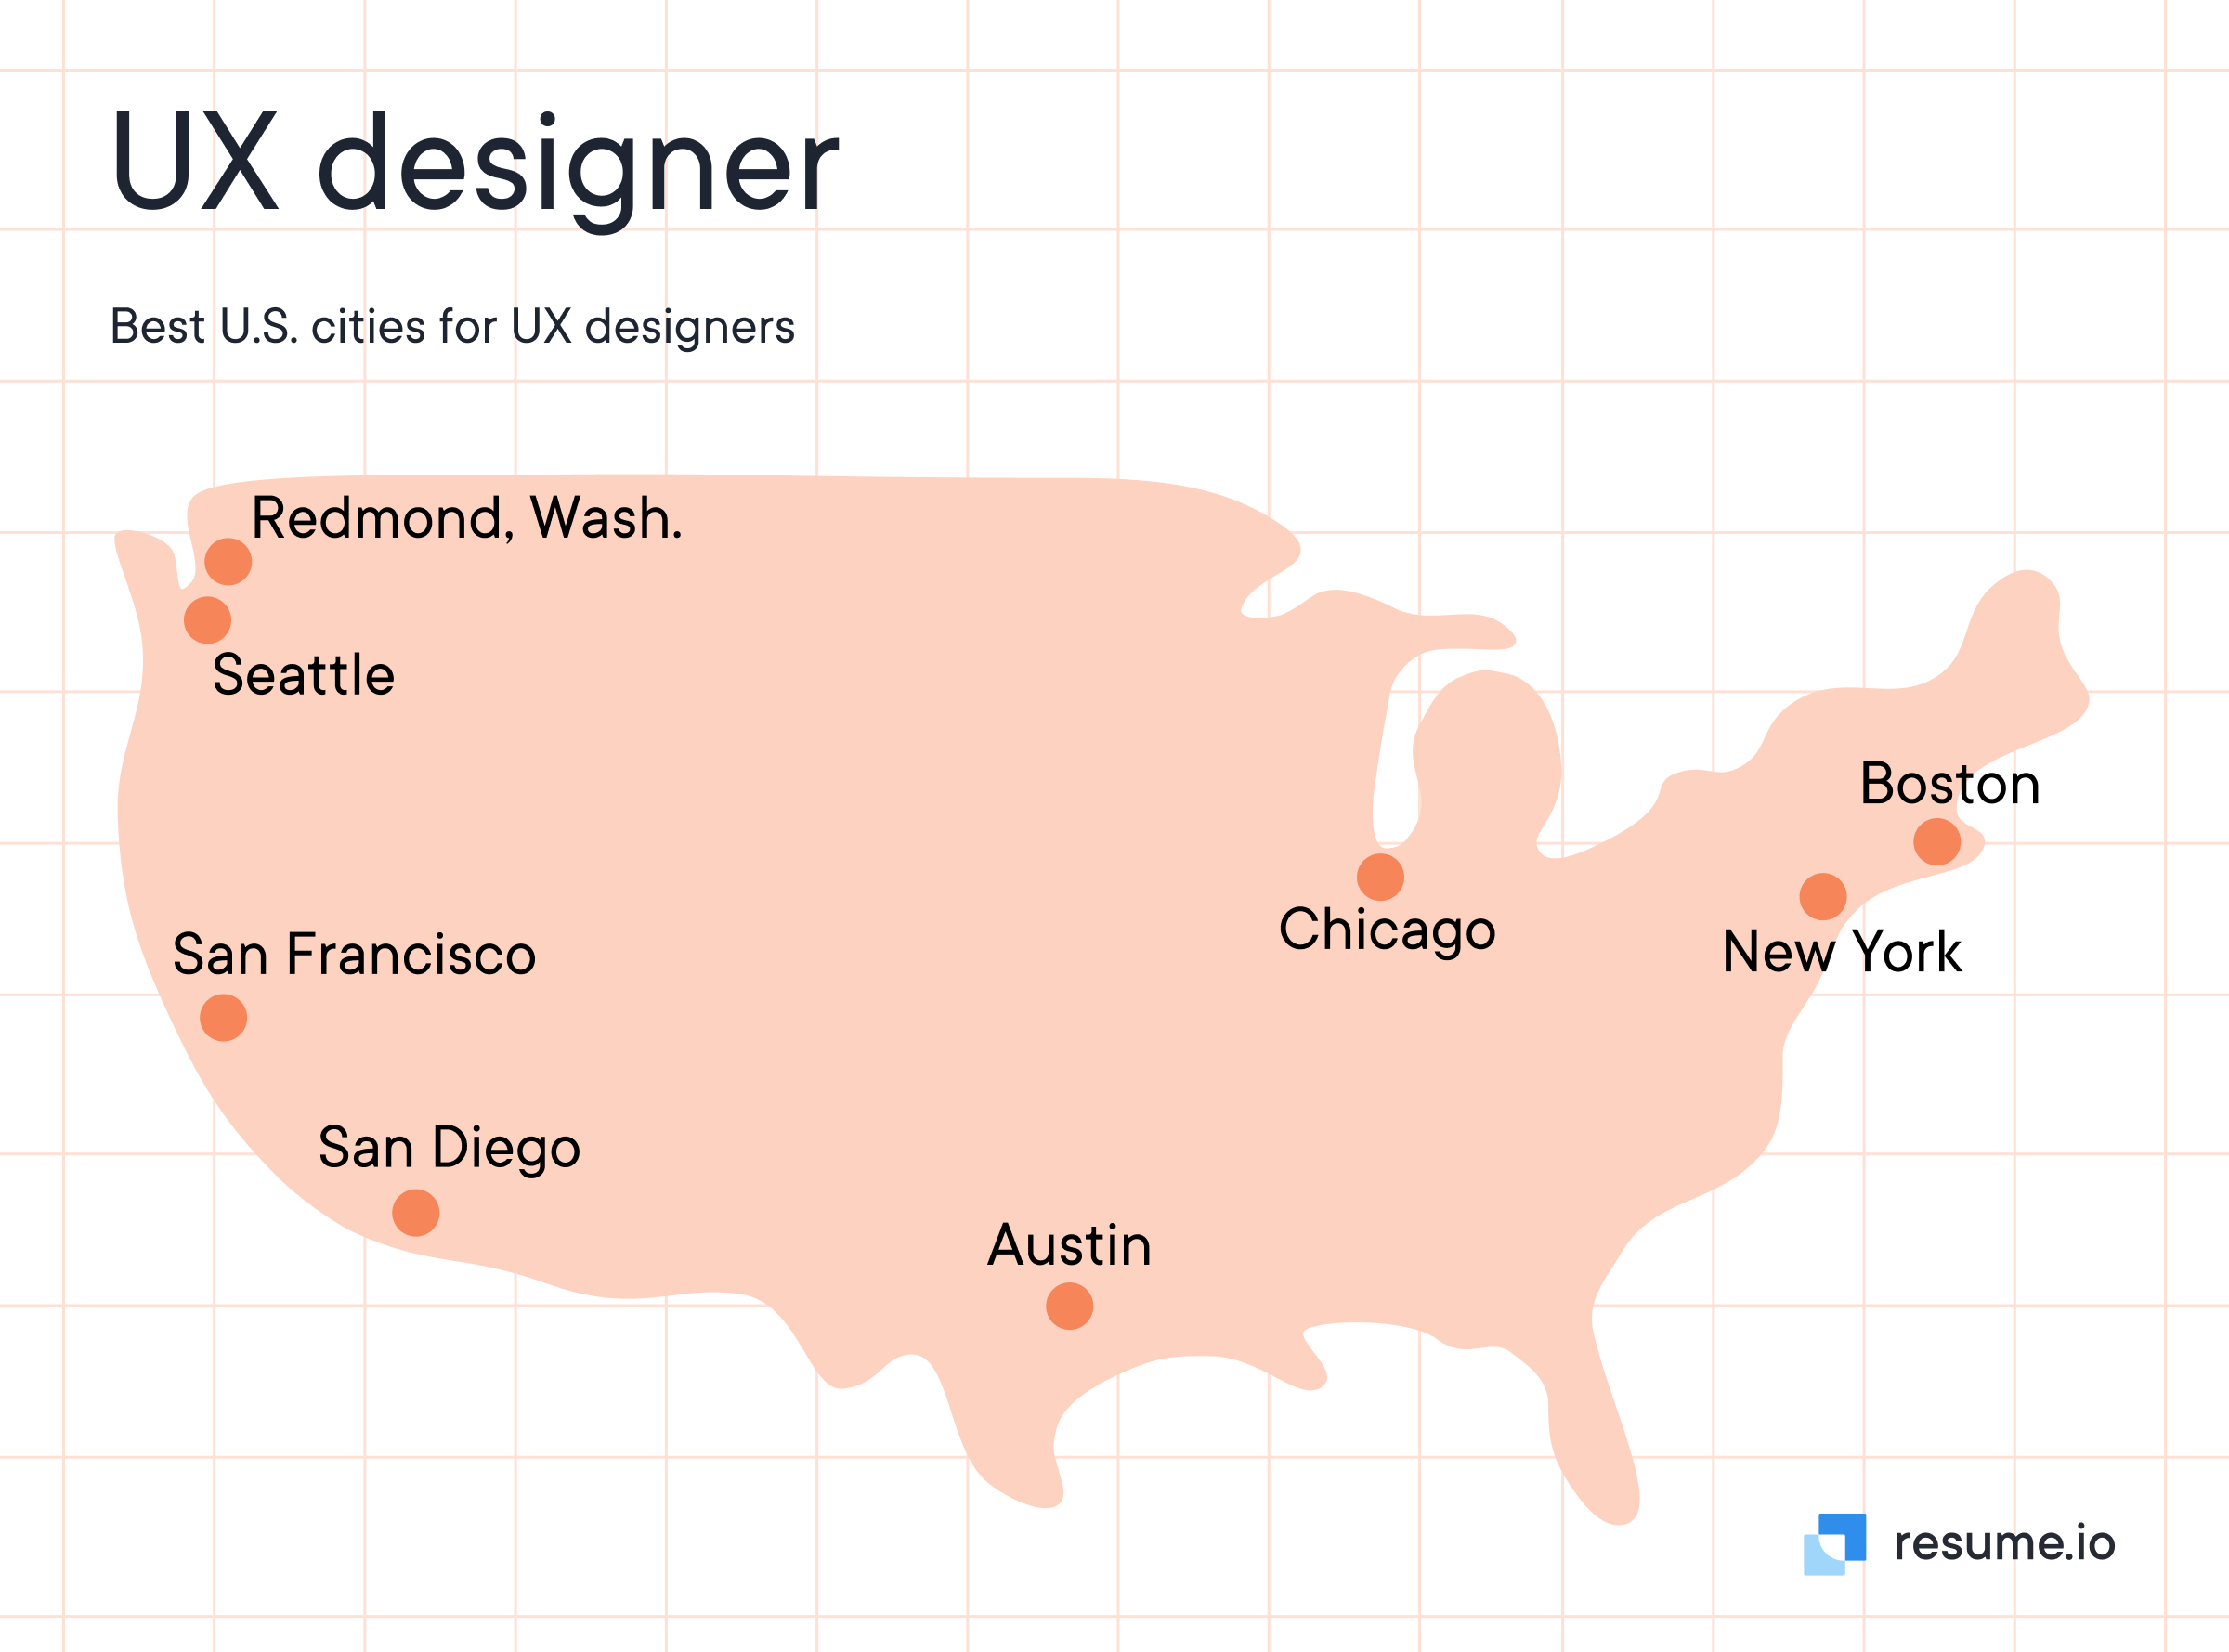 Some of the best U.S. cities for UX designers are Chicago, Boston, New York, Austin, San Diego, San Fransisco, Seattle and Redmond, wash. 